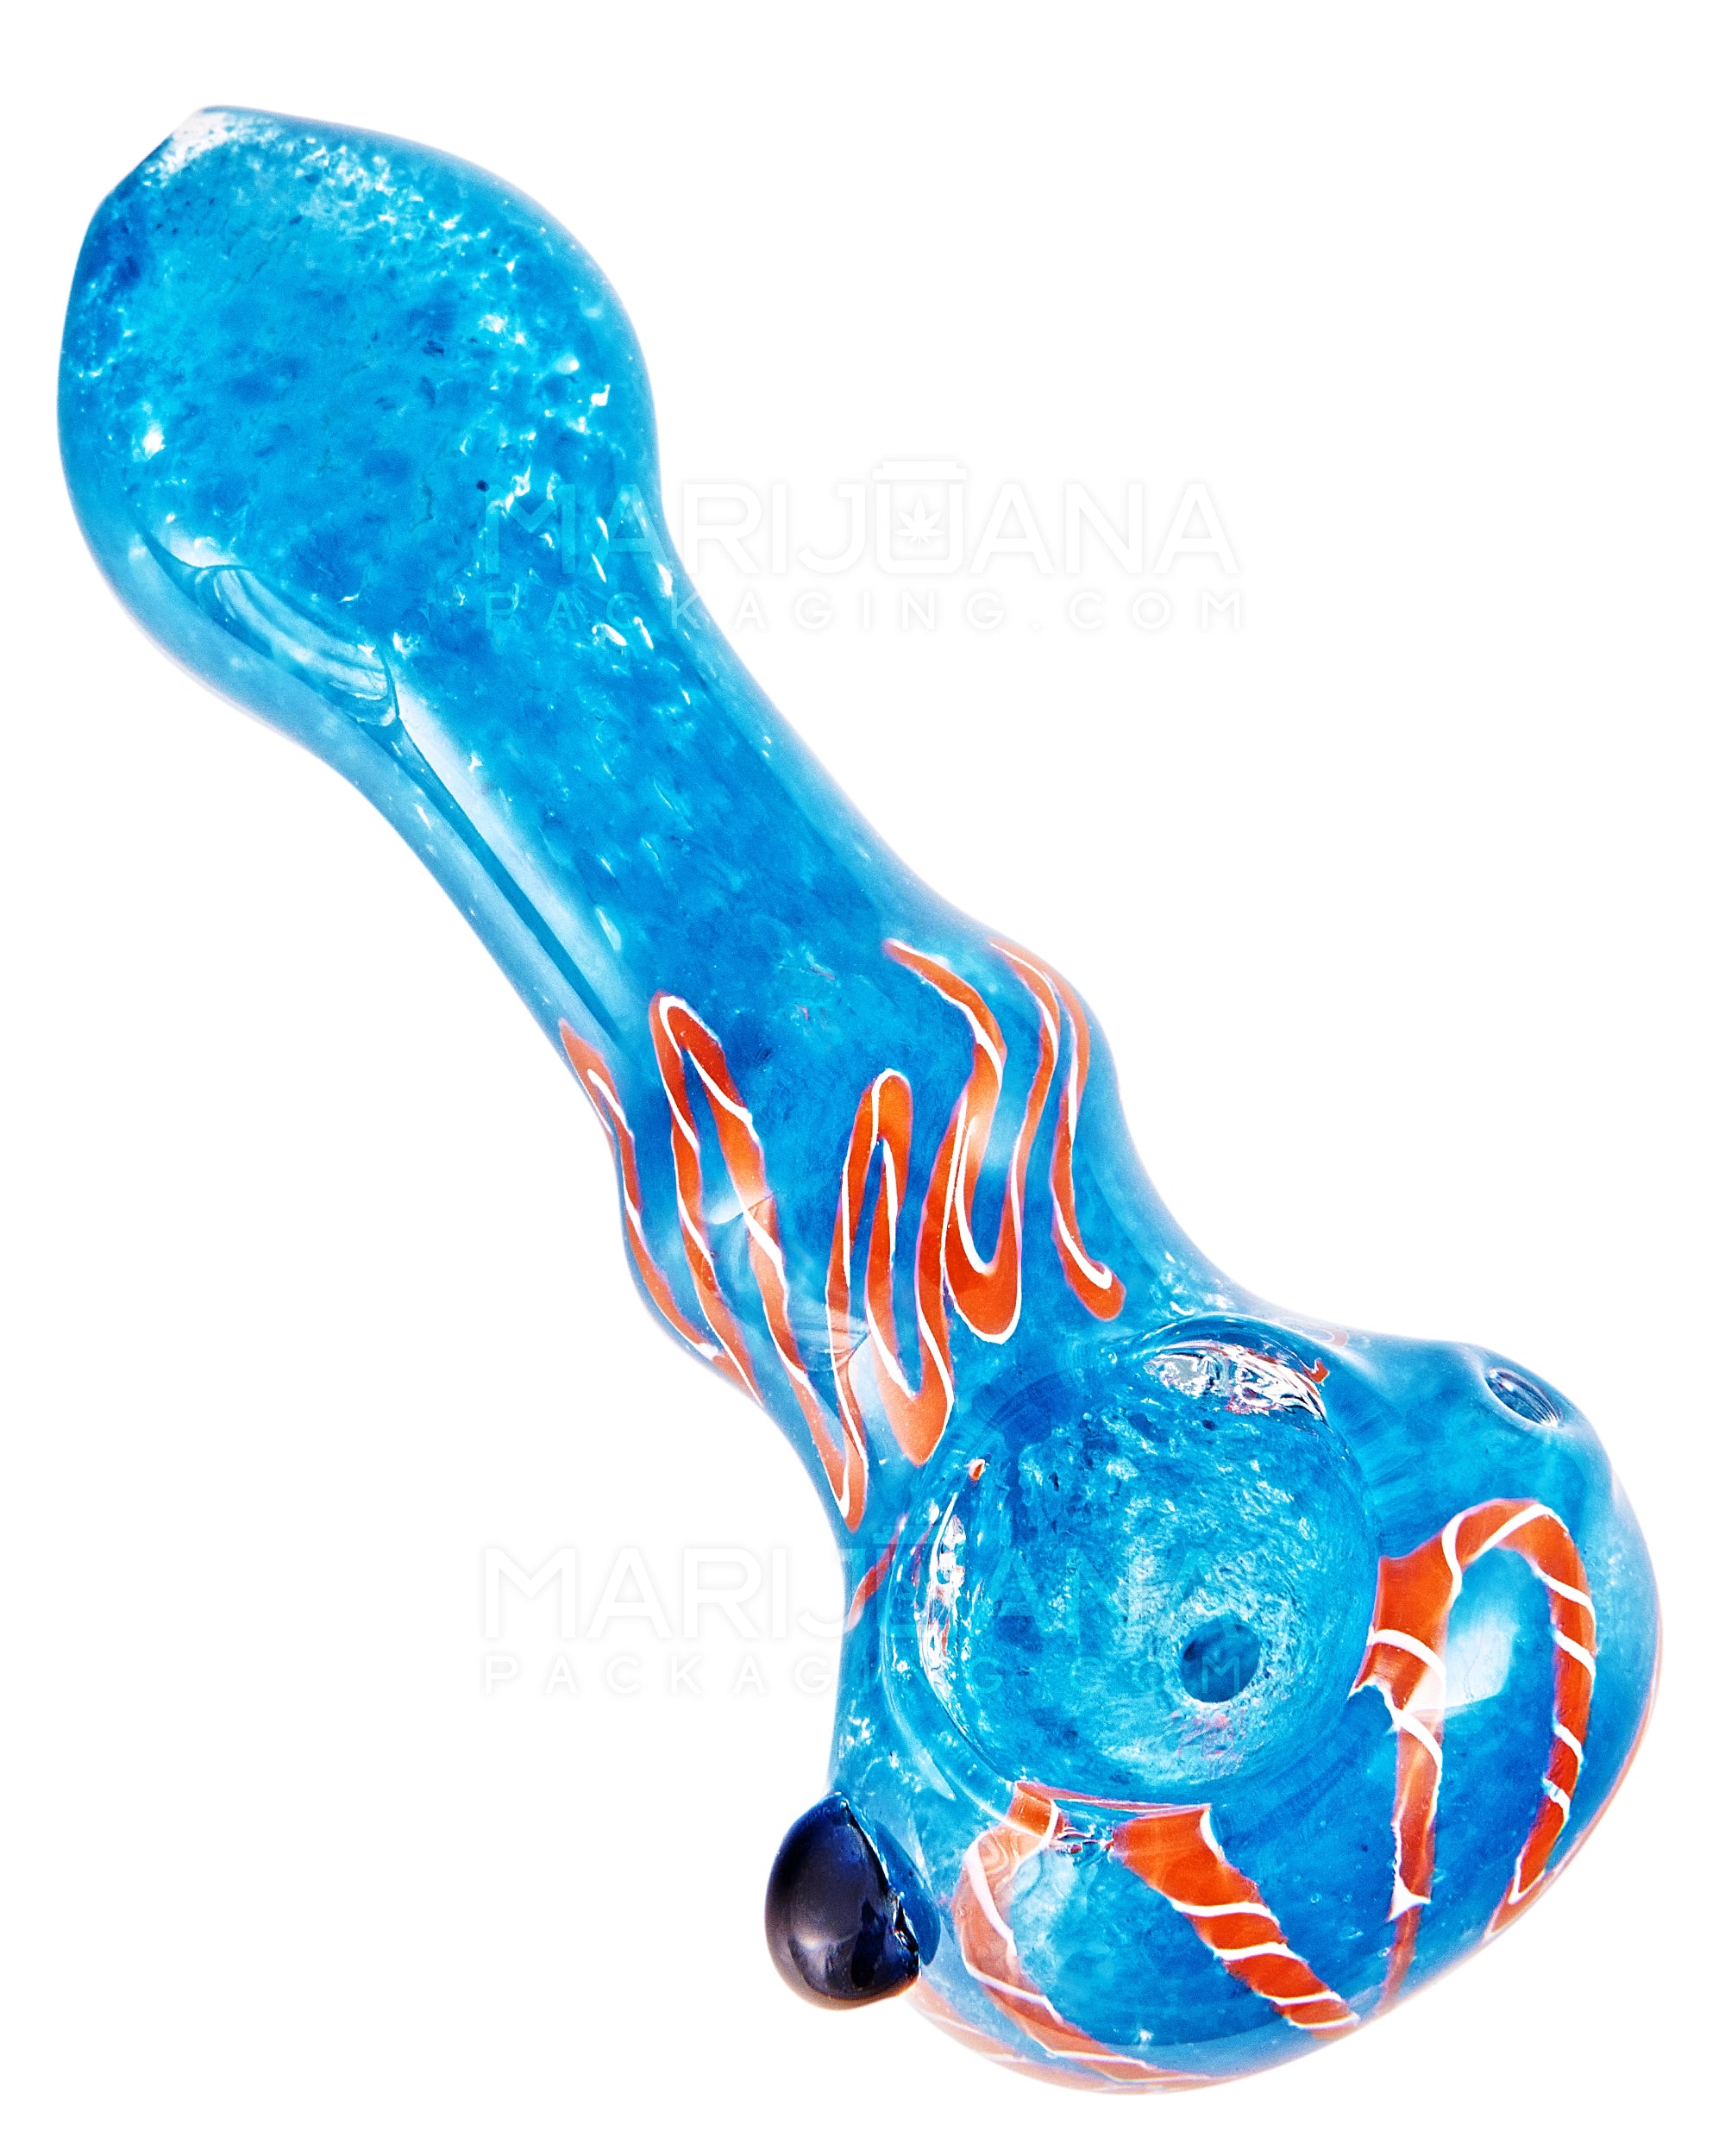 Ribboned & Frit Bulged Spoon Hand Pipe w/ Knocker | 3.5in Long - Glass - Assorted - 1